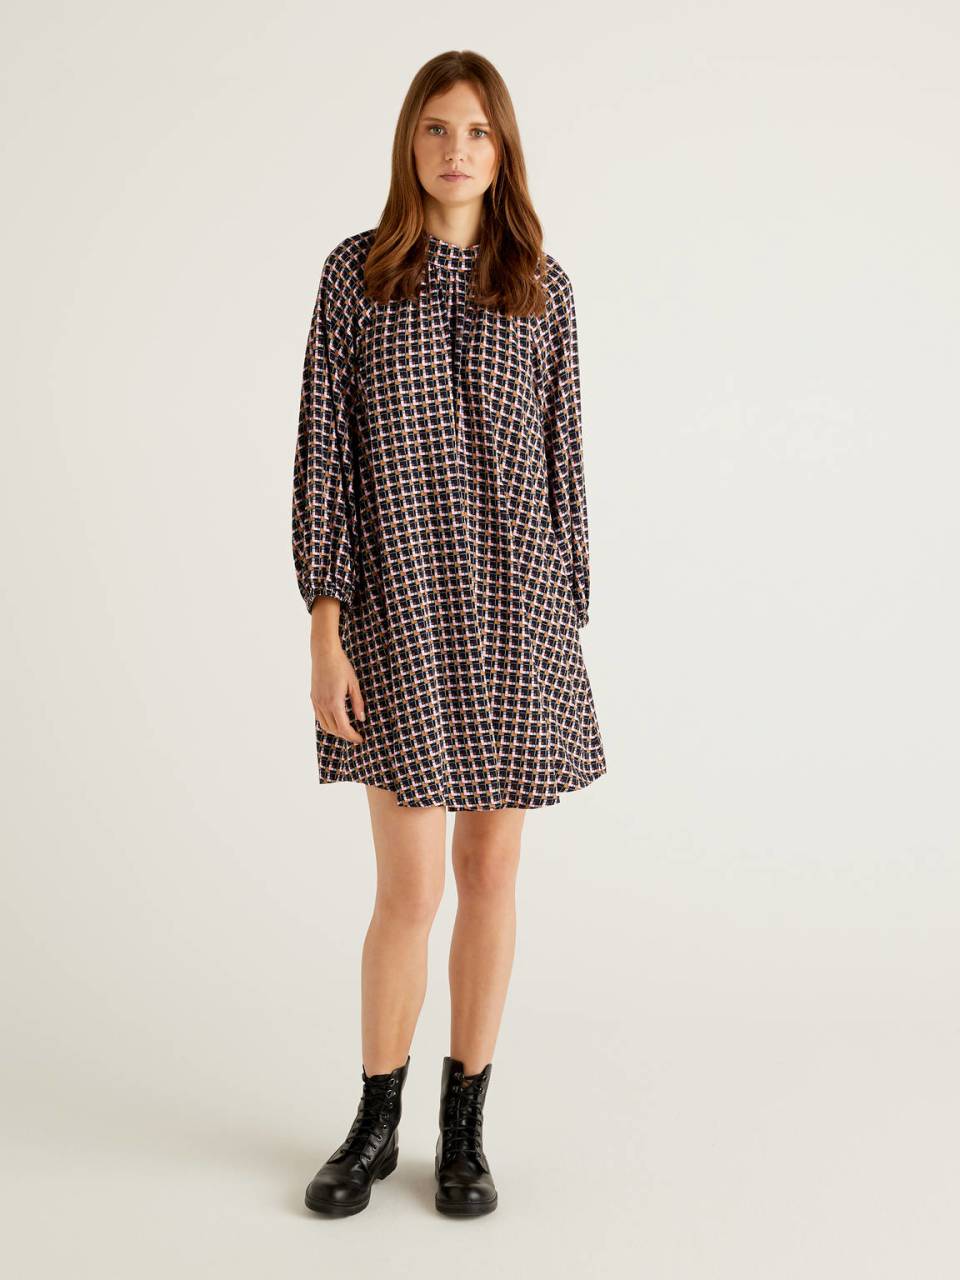 Benetton Patterned dress in sustainable viscose. 1